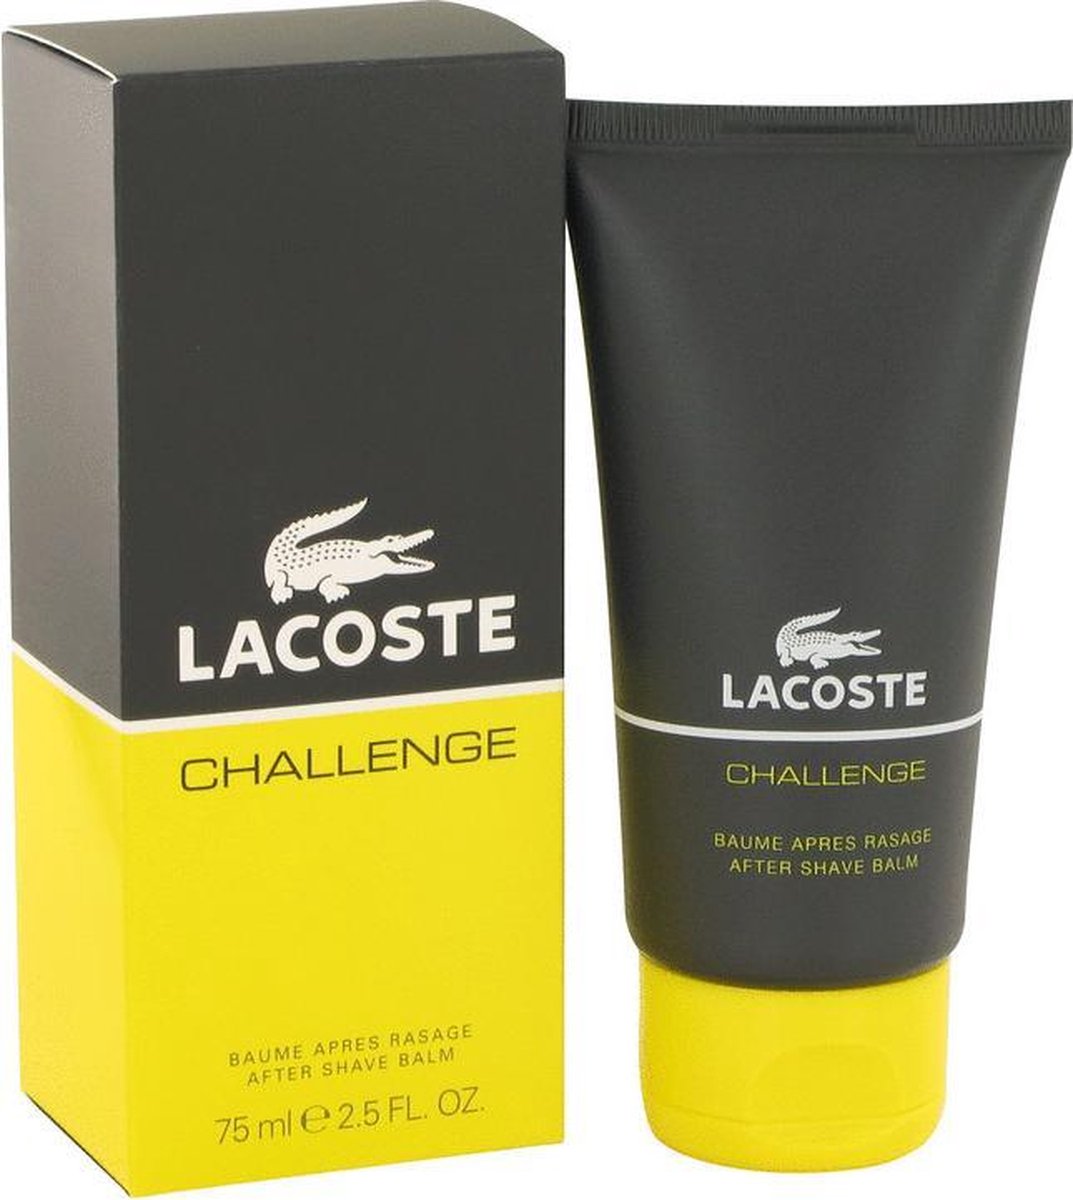 Lacoste Challenge after shave balm 75 ml